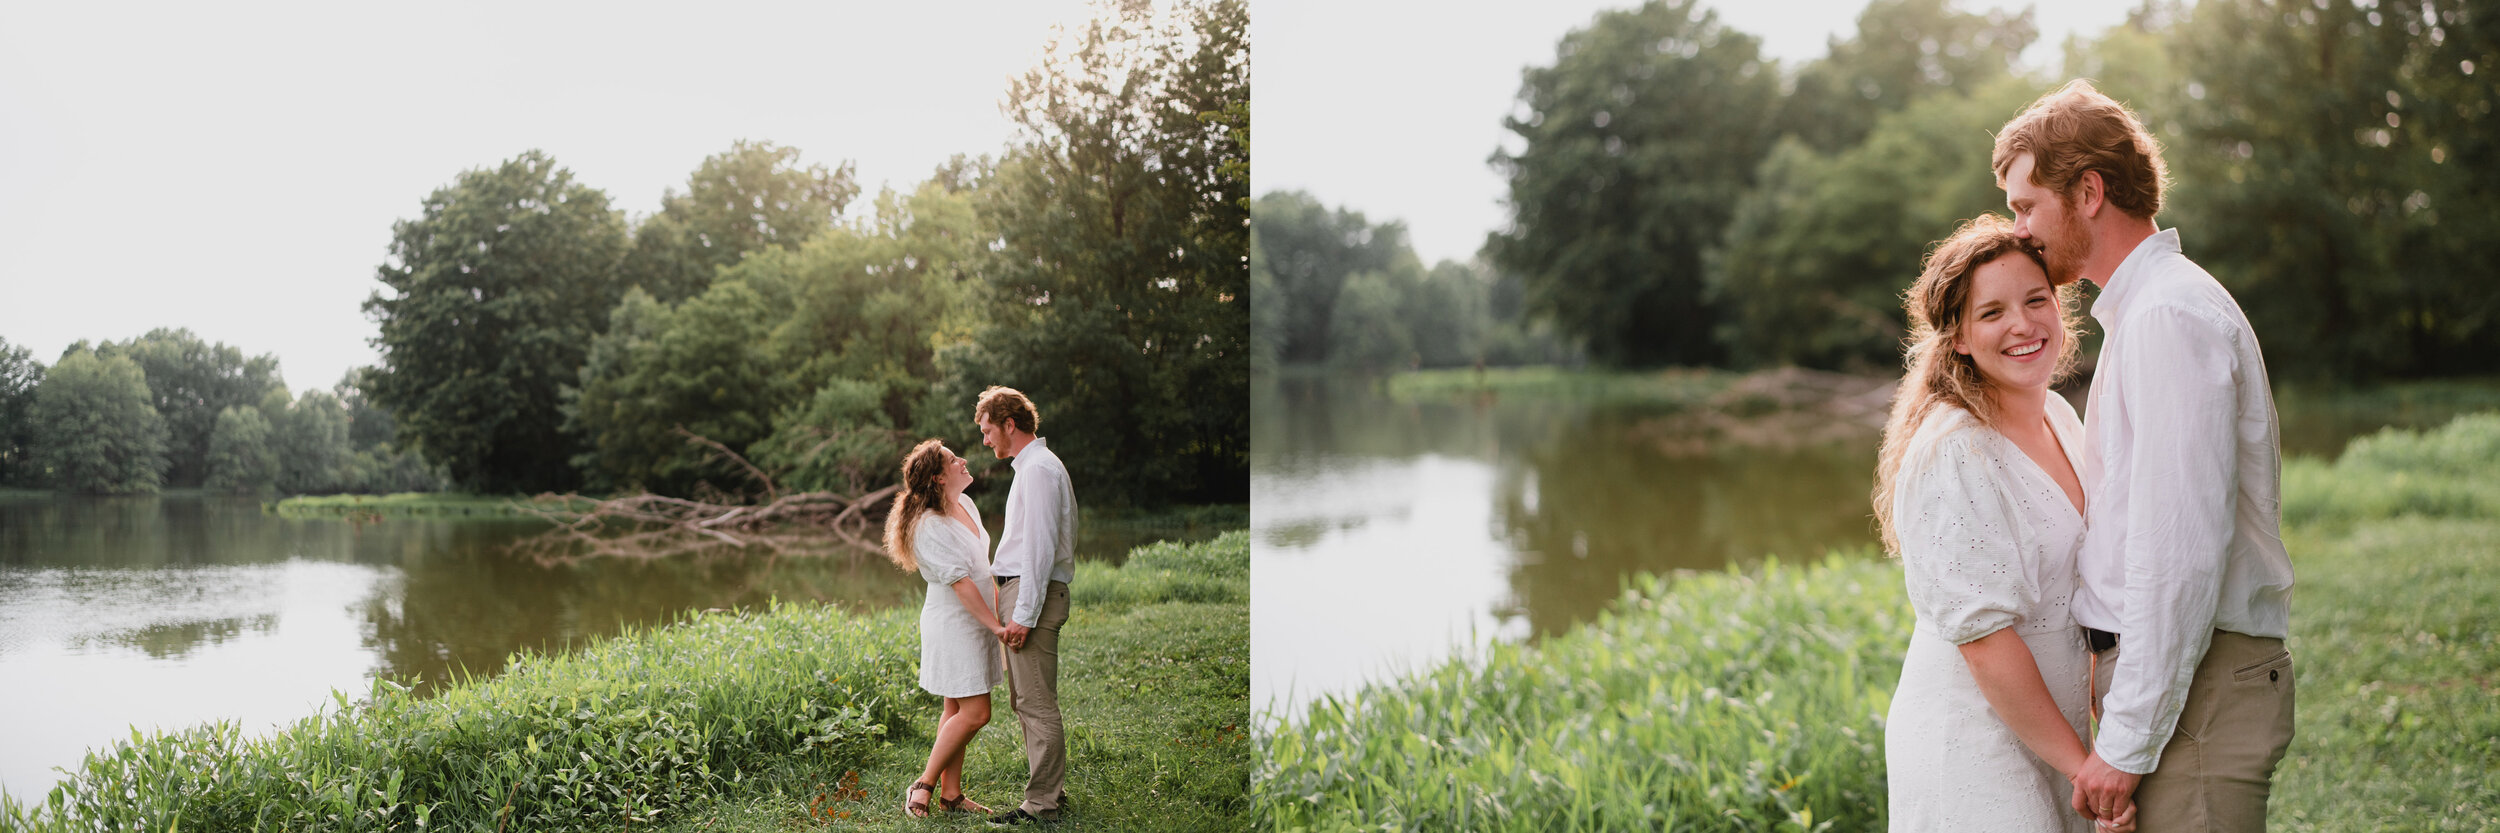 Kansas City Couples Photographer Wildflower Session with EffJay Photography004.jpg